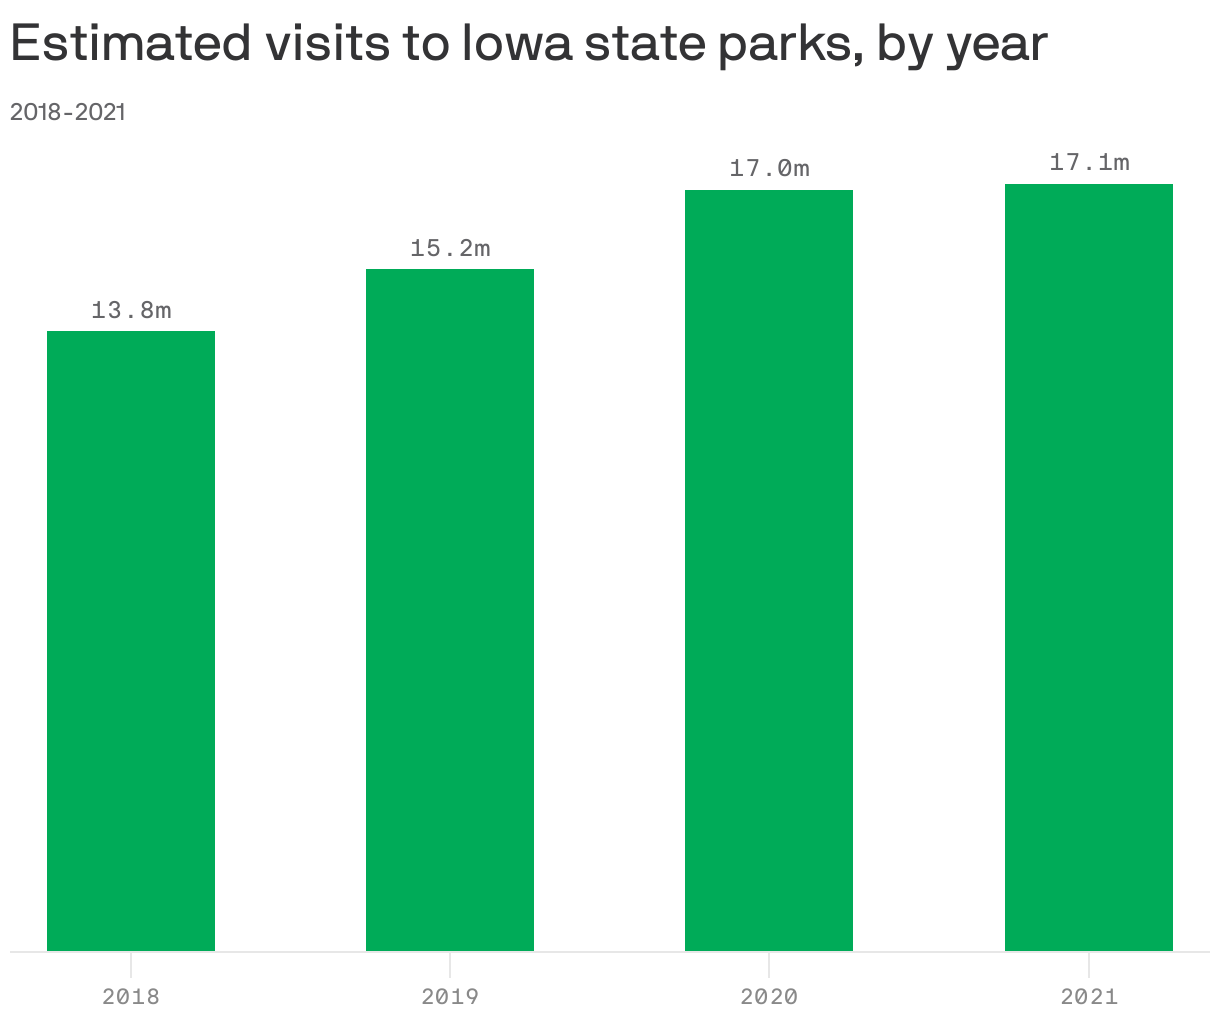 Estimated visits to Iowa state parks, by year